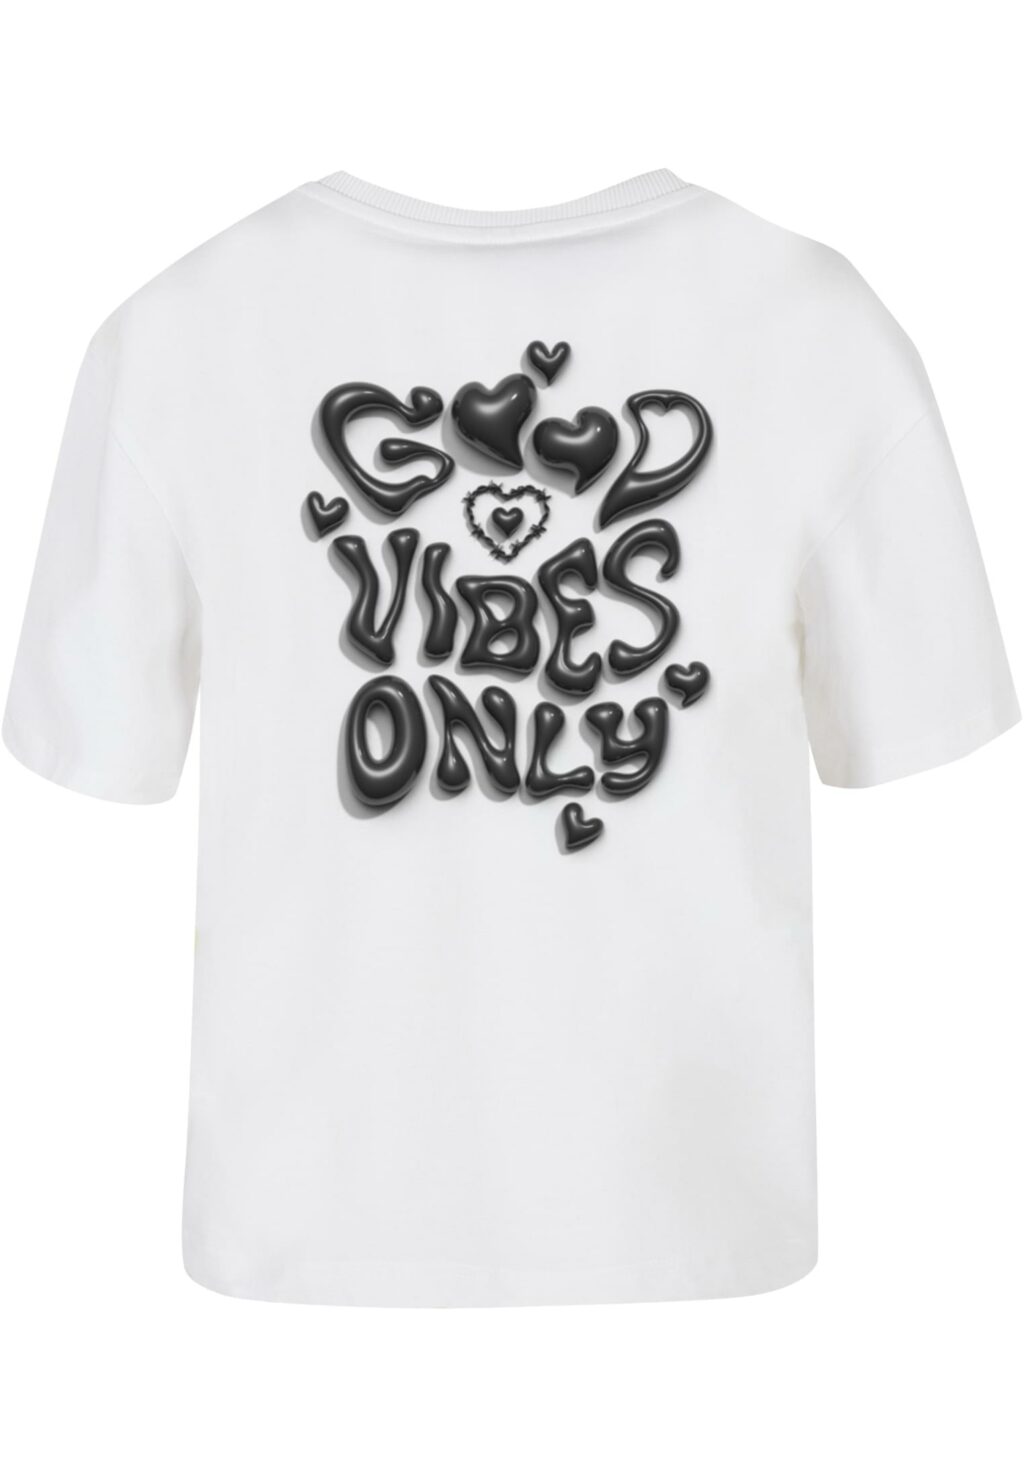 Good Vibes Only Heart Tee white MST094